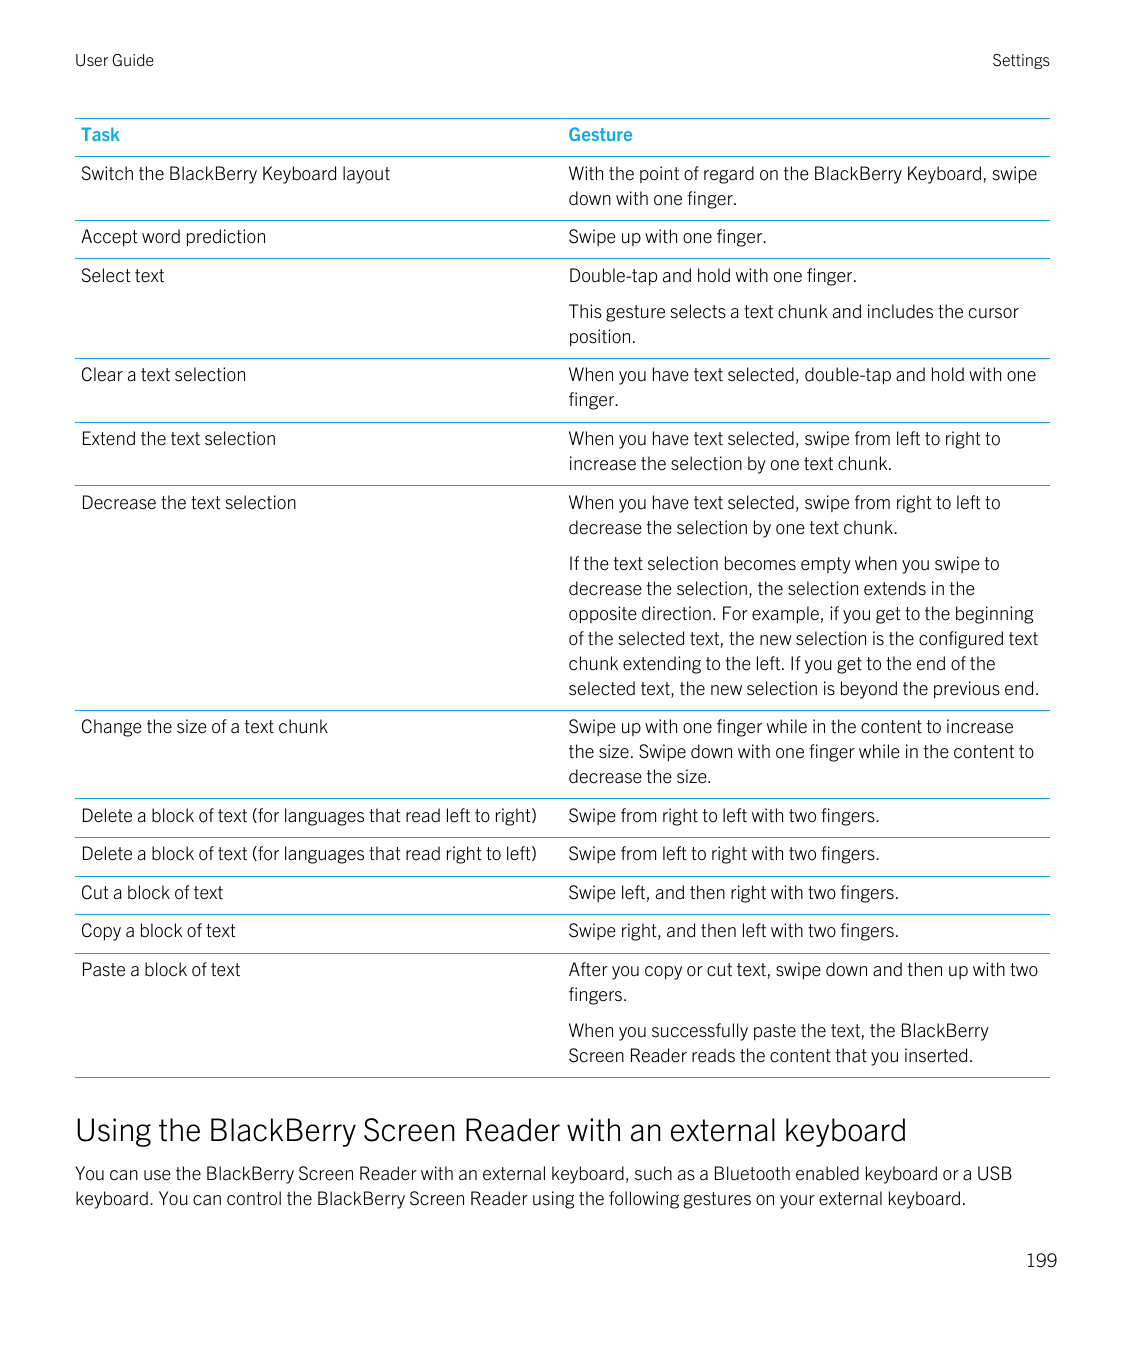 User GuideSettingsTaskGestureSwitch the BlackBerry Keyboard layoutWith the point of regard on the BlackBerry Keyboard, swipedown